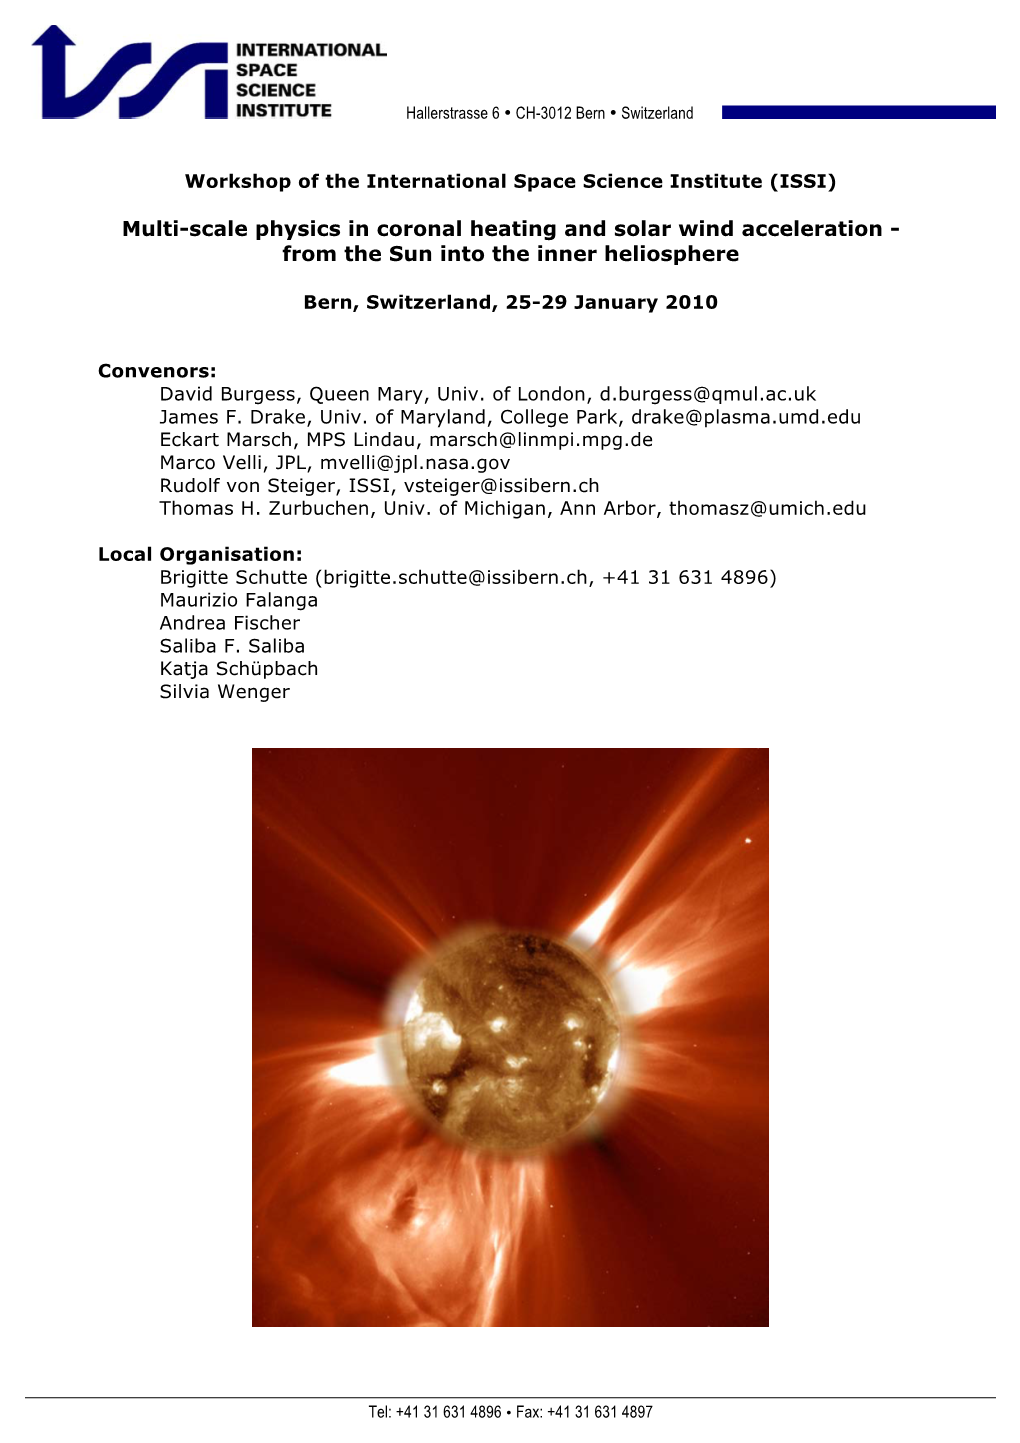 Multi-Scale Physics in Coronal Heating and Solar Wind Acceleration - from the Sun Into the Inner Heliosphere